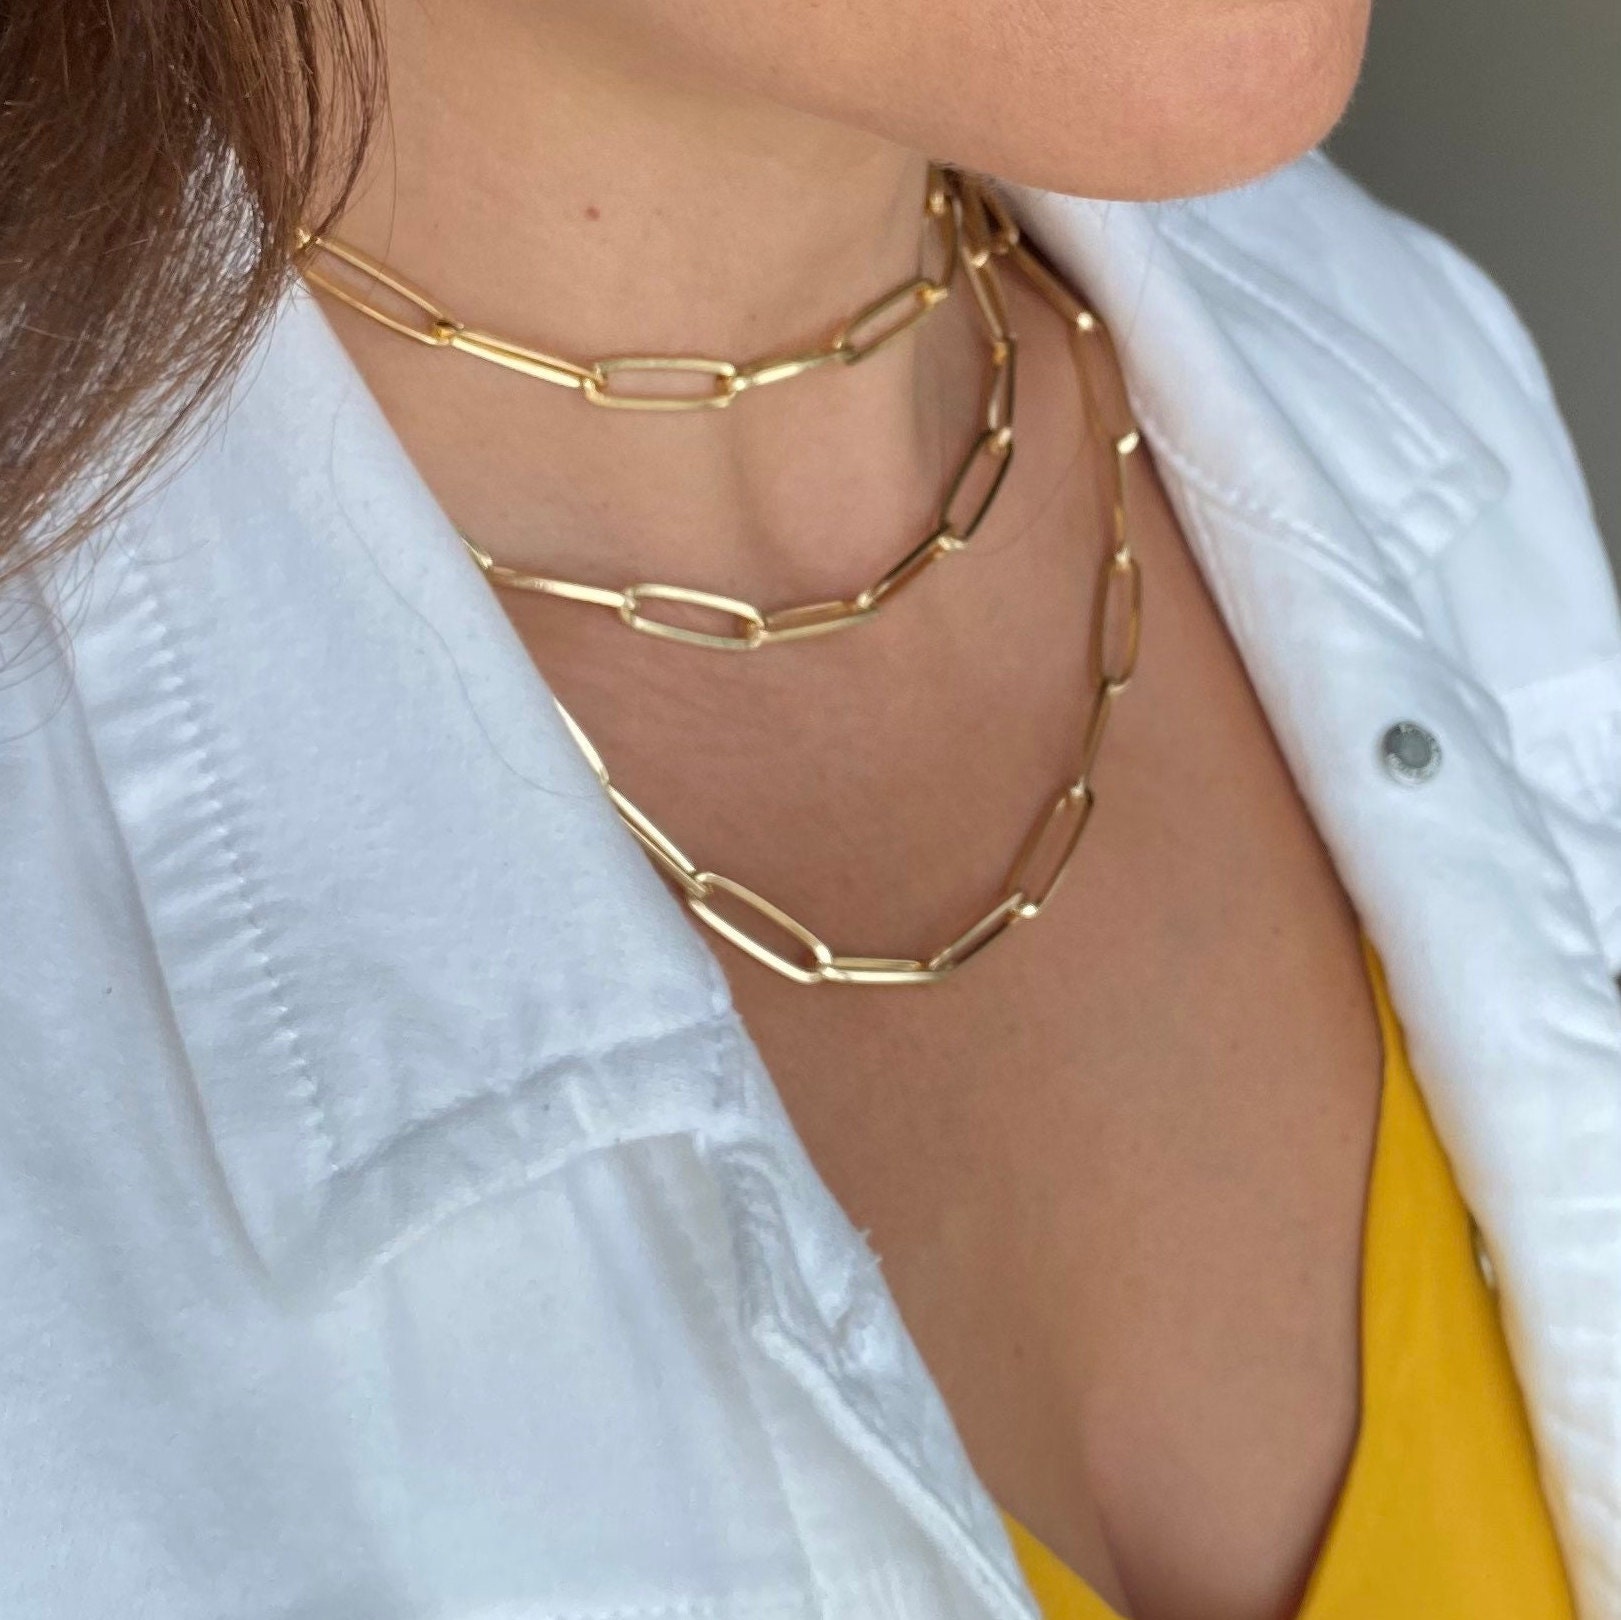  BOUTIQUELOVIN Gold Paperclip Chain Lock Necklace for Women   14K Gold Plated Thick Necklaces Link Chain Choker Necklaces Chunky Pendants  Jewelry: Clothing, Shoes & Jewelry